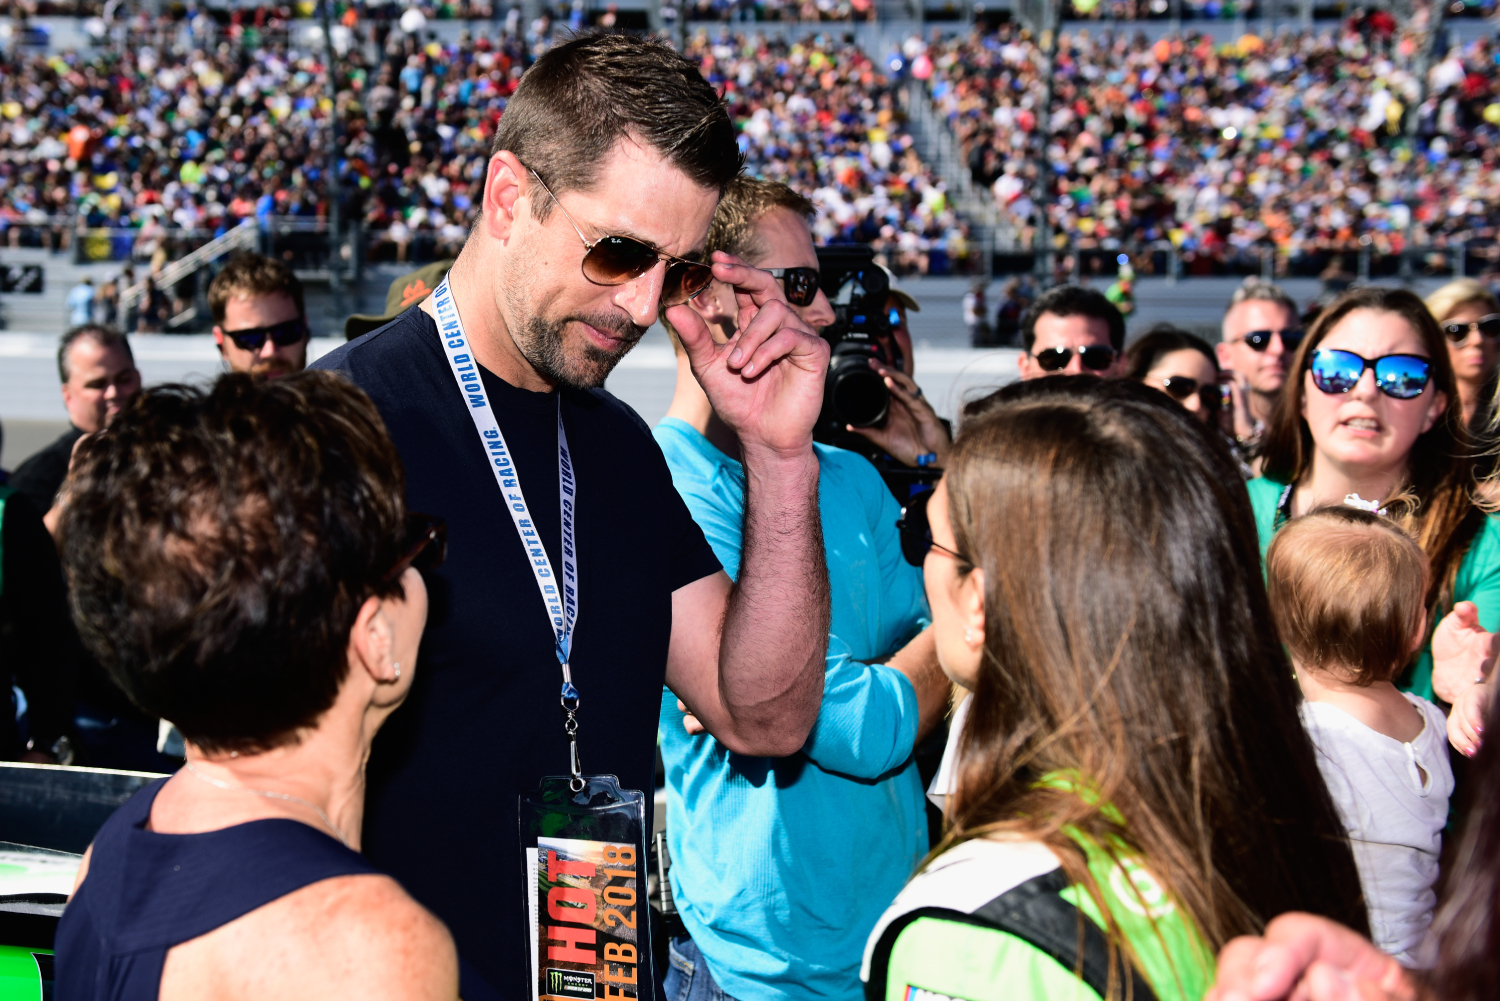 Why did Aaron Rodgers intimidate Danica Patrick so much?